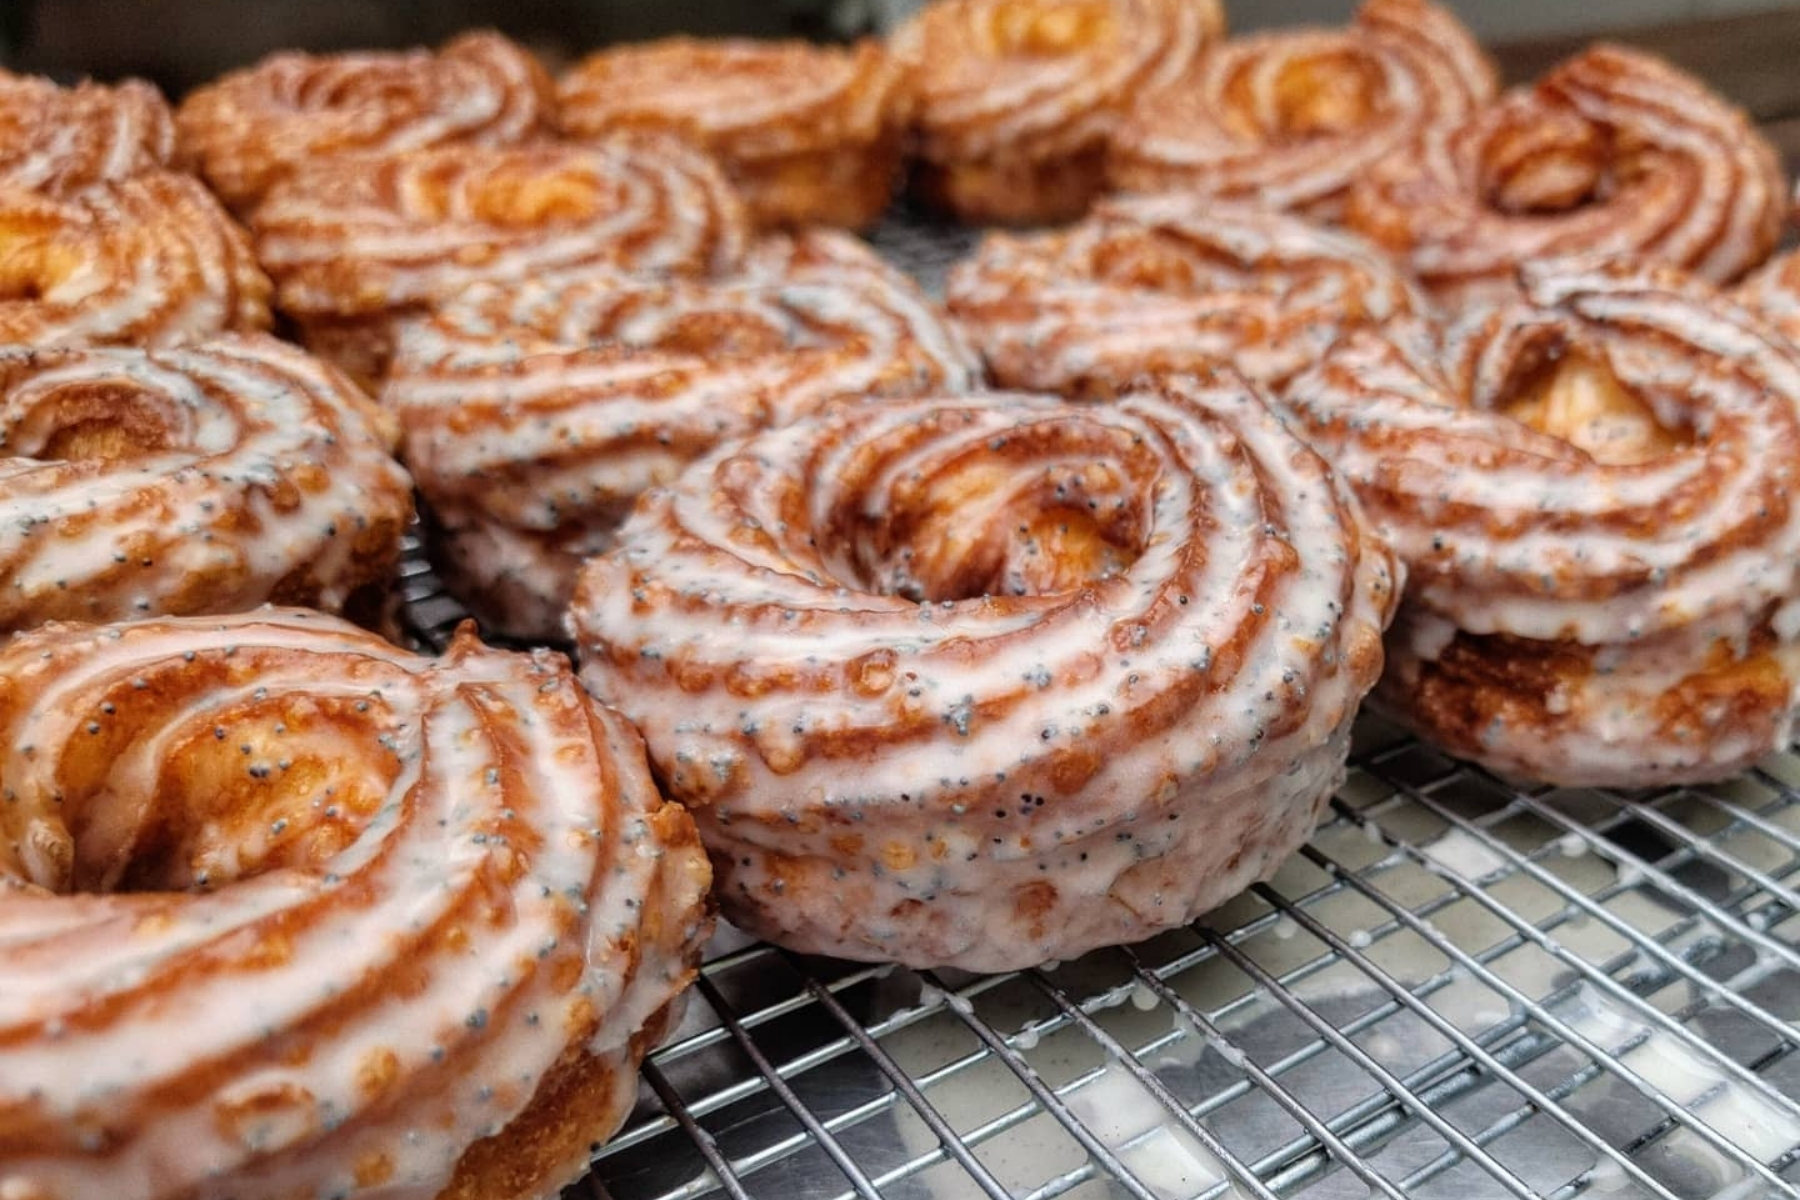 Competitors loyalty Record Carte Blanche Opens Soon with Crullers and Croissants in Lowest Greenville  - D Magazine